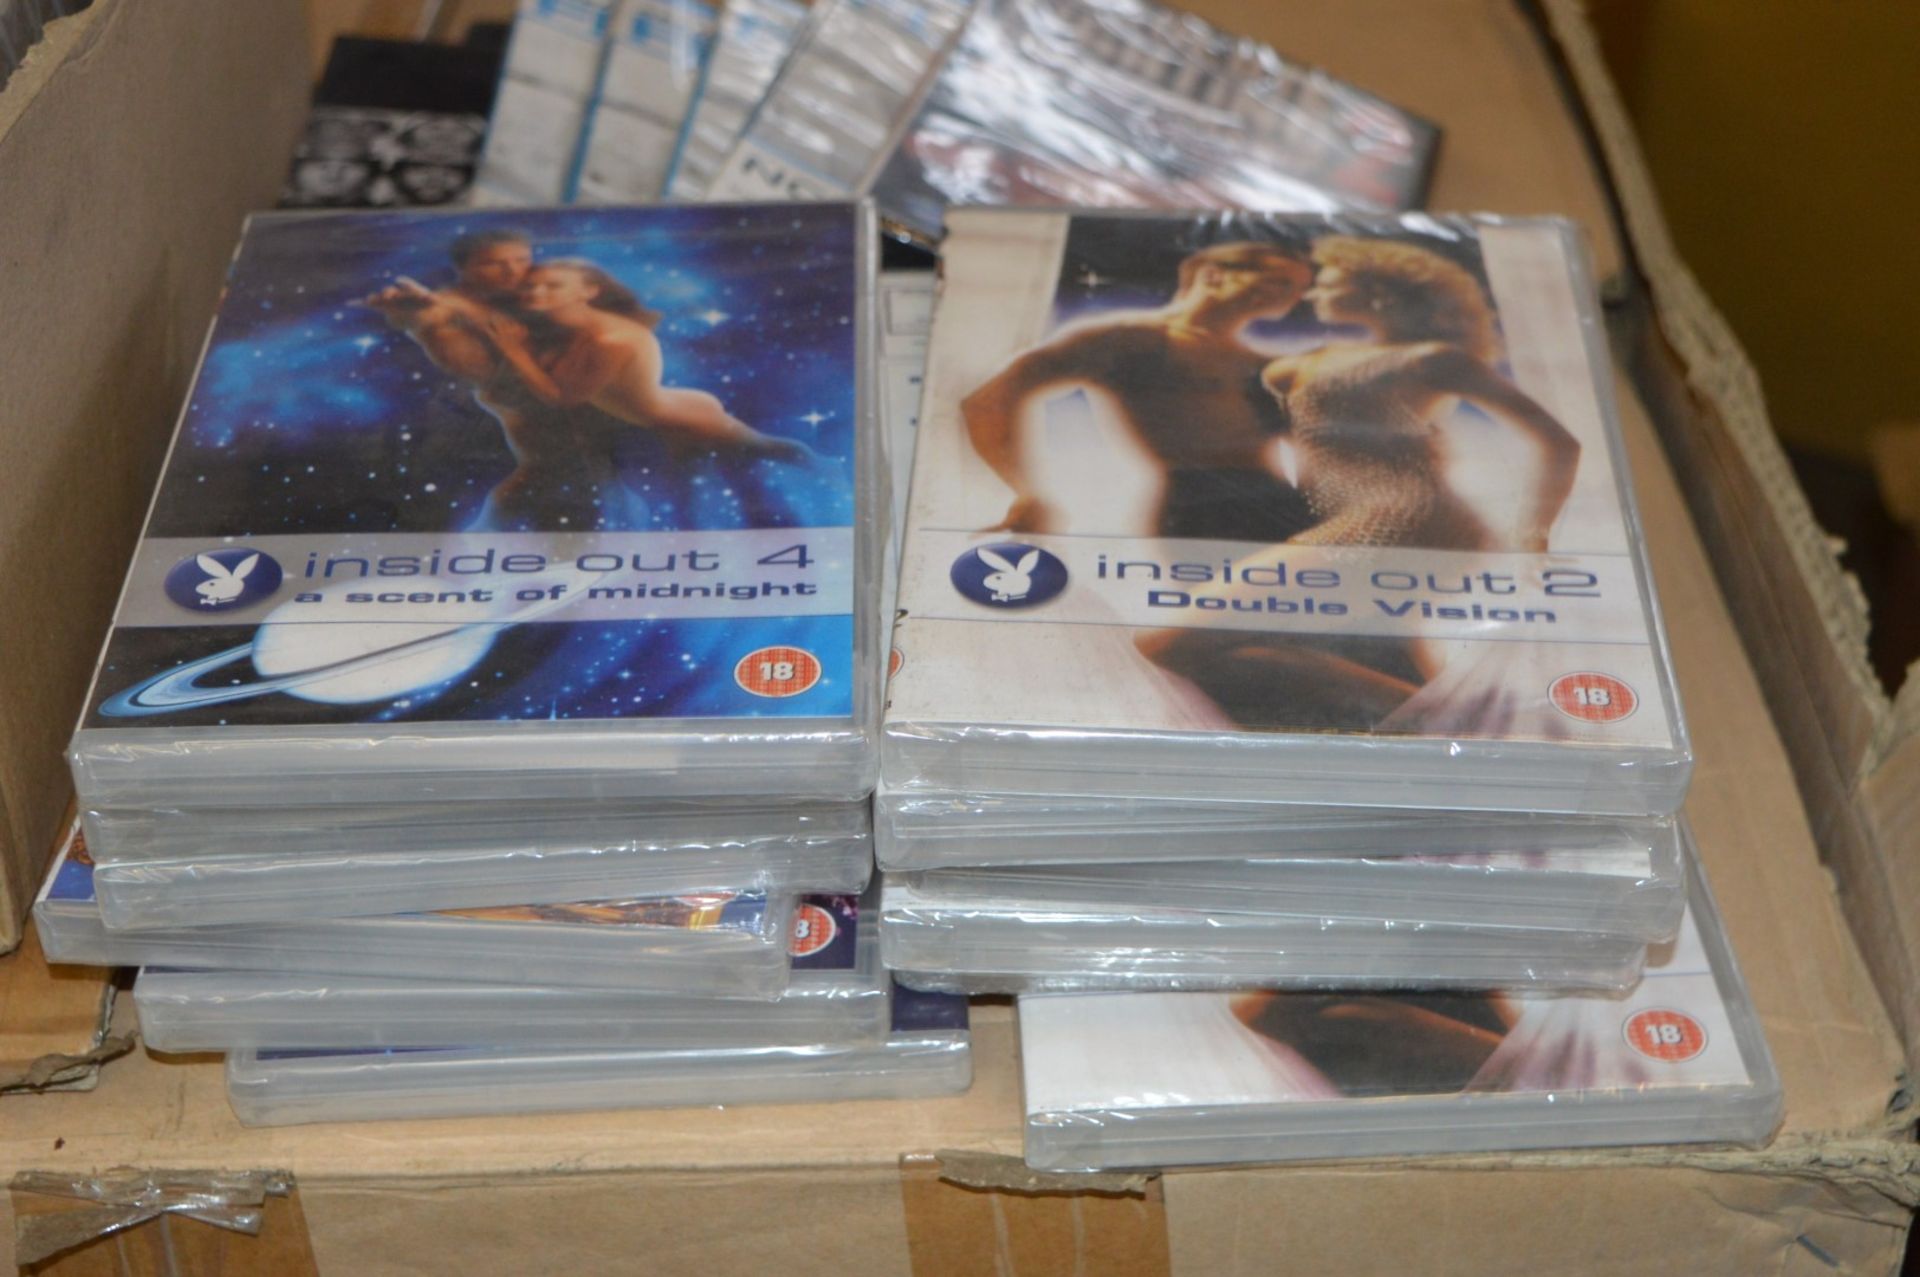 44 x Various DVD Movies - Includes Adult Content - Over 18's Only - CL185 - Brand New Stock - Ref - Image 2 of 4